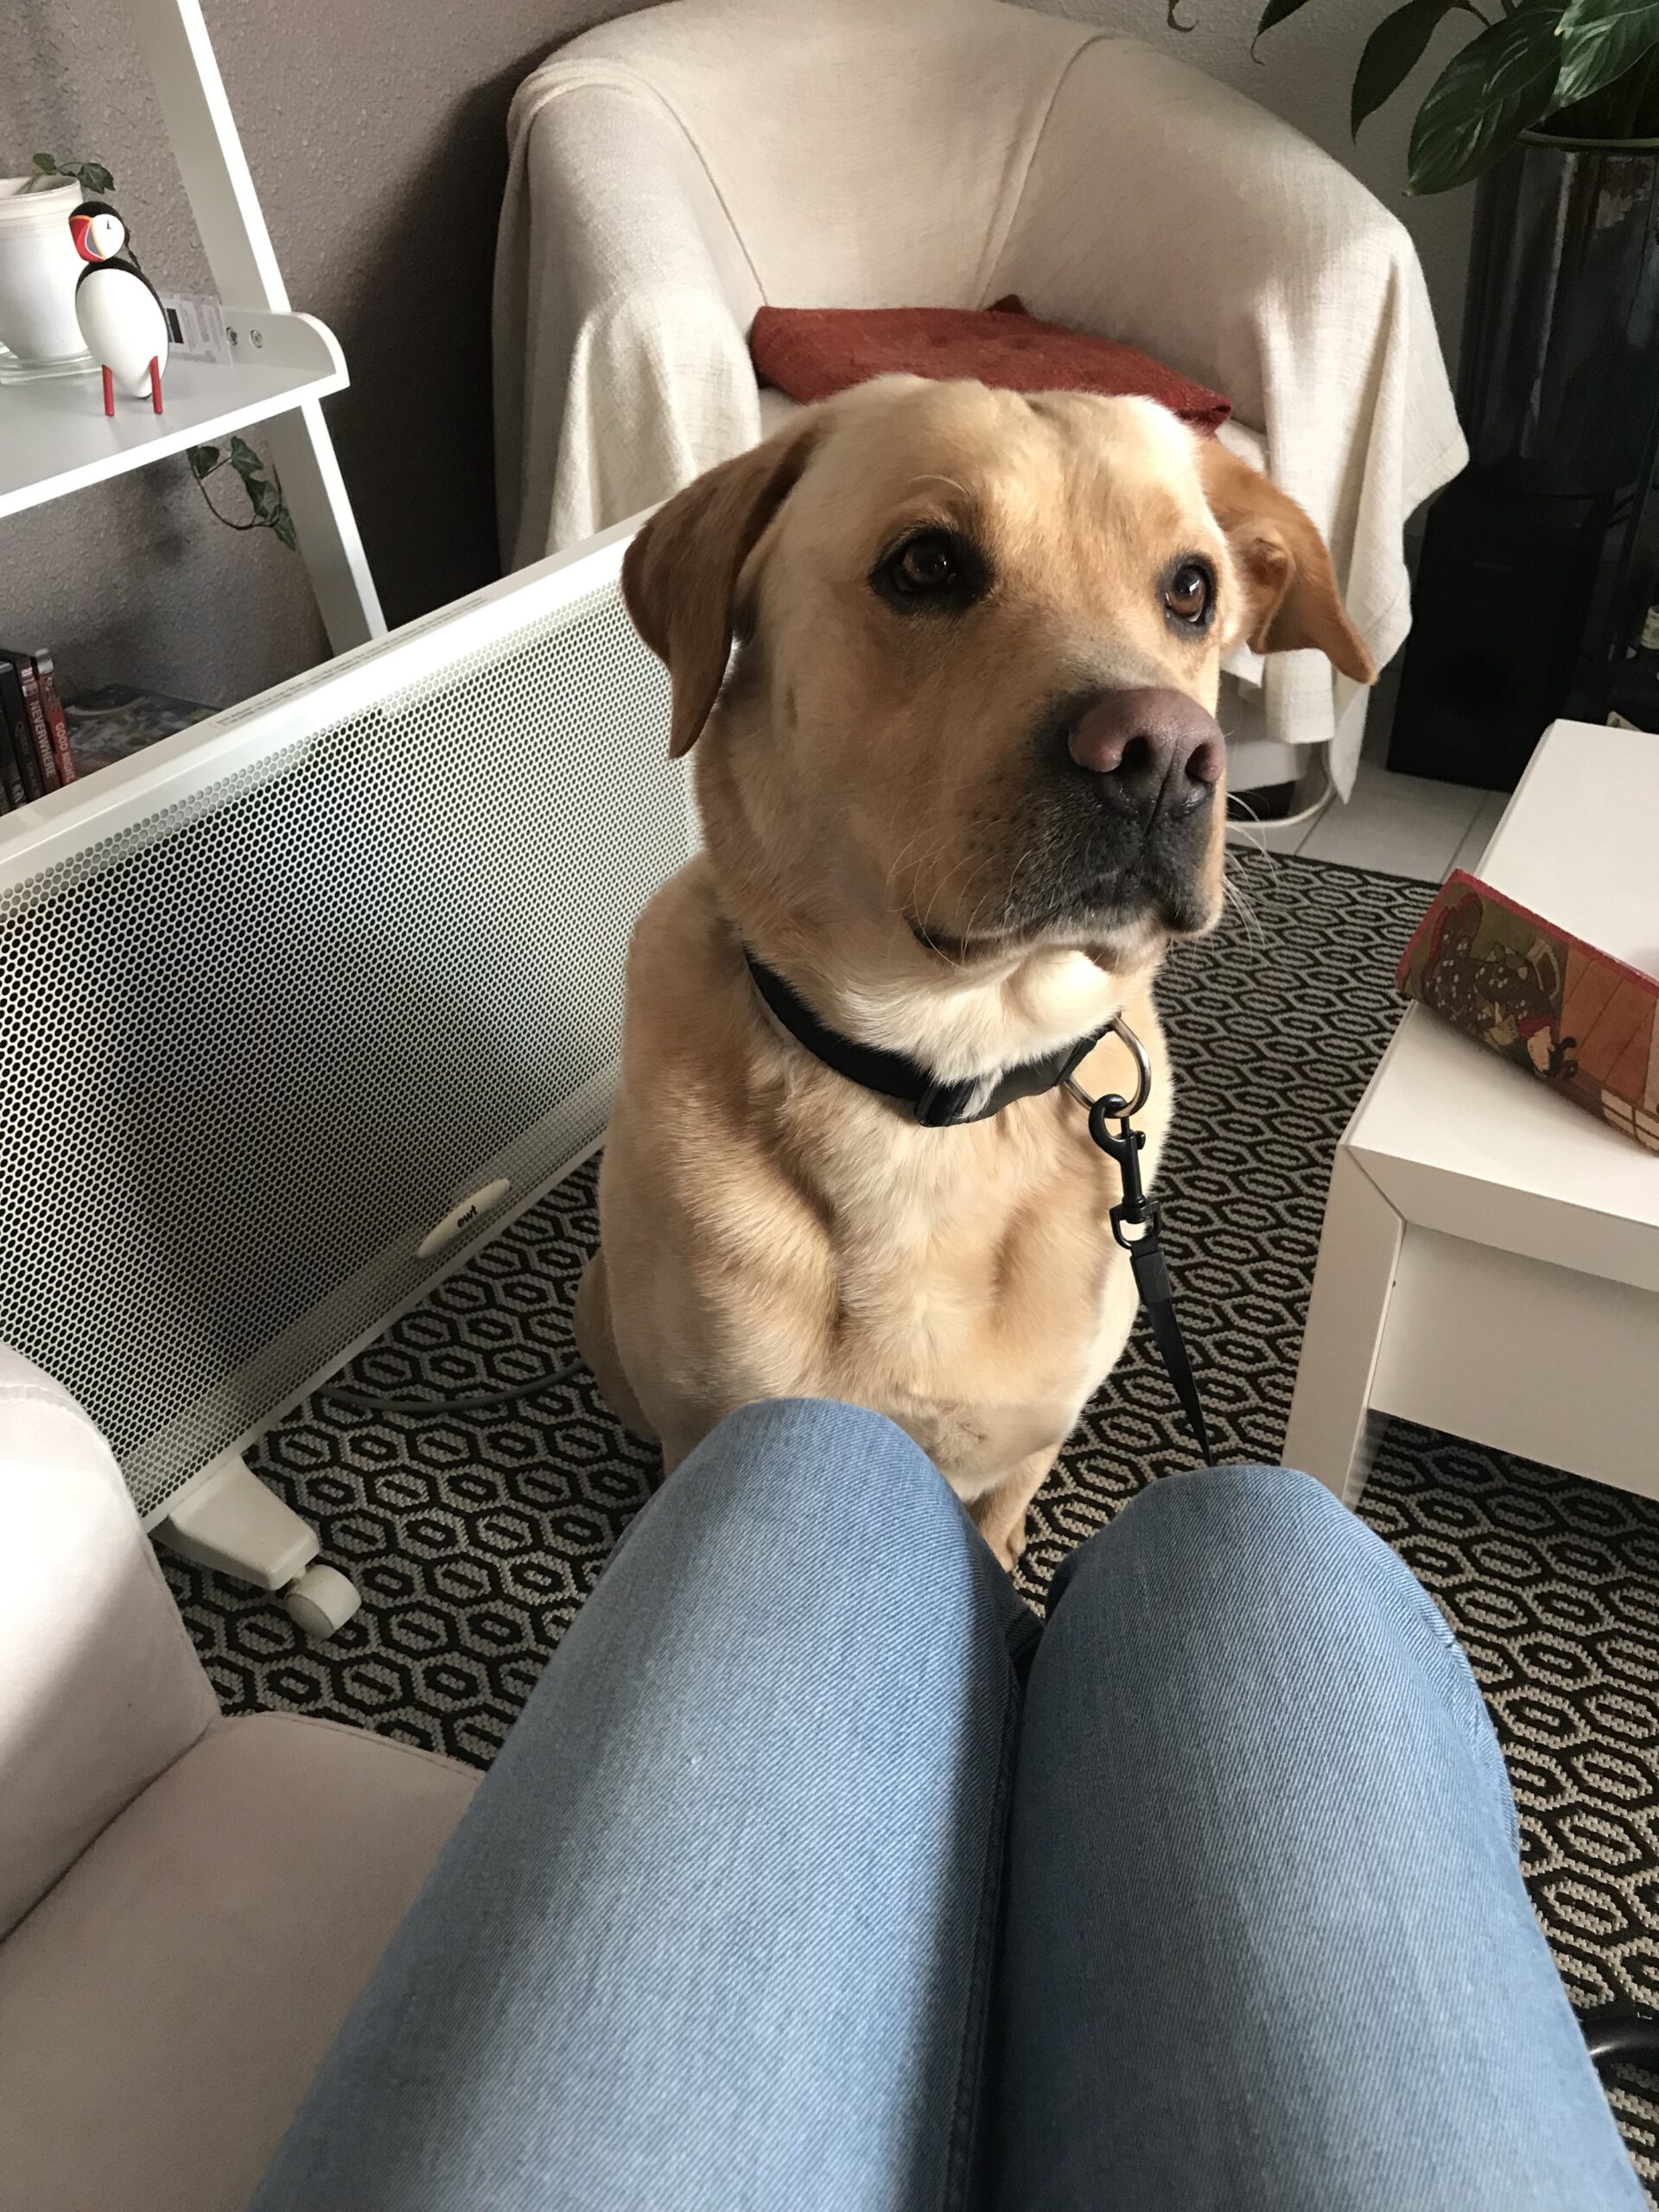 Yellow labrador sitting in front of me. My knees are visible. The dog looks with curiosity at the side of me.